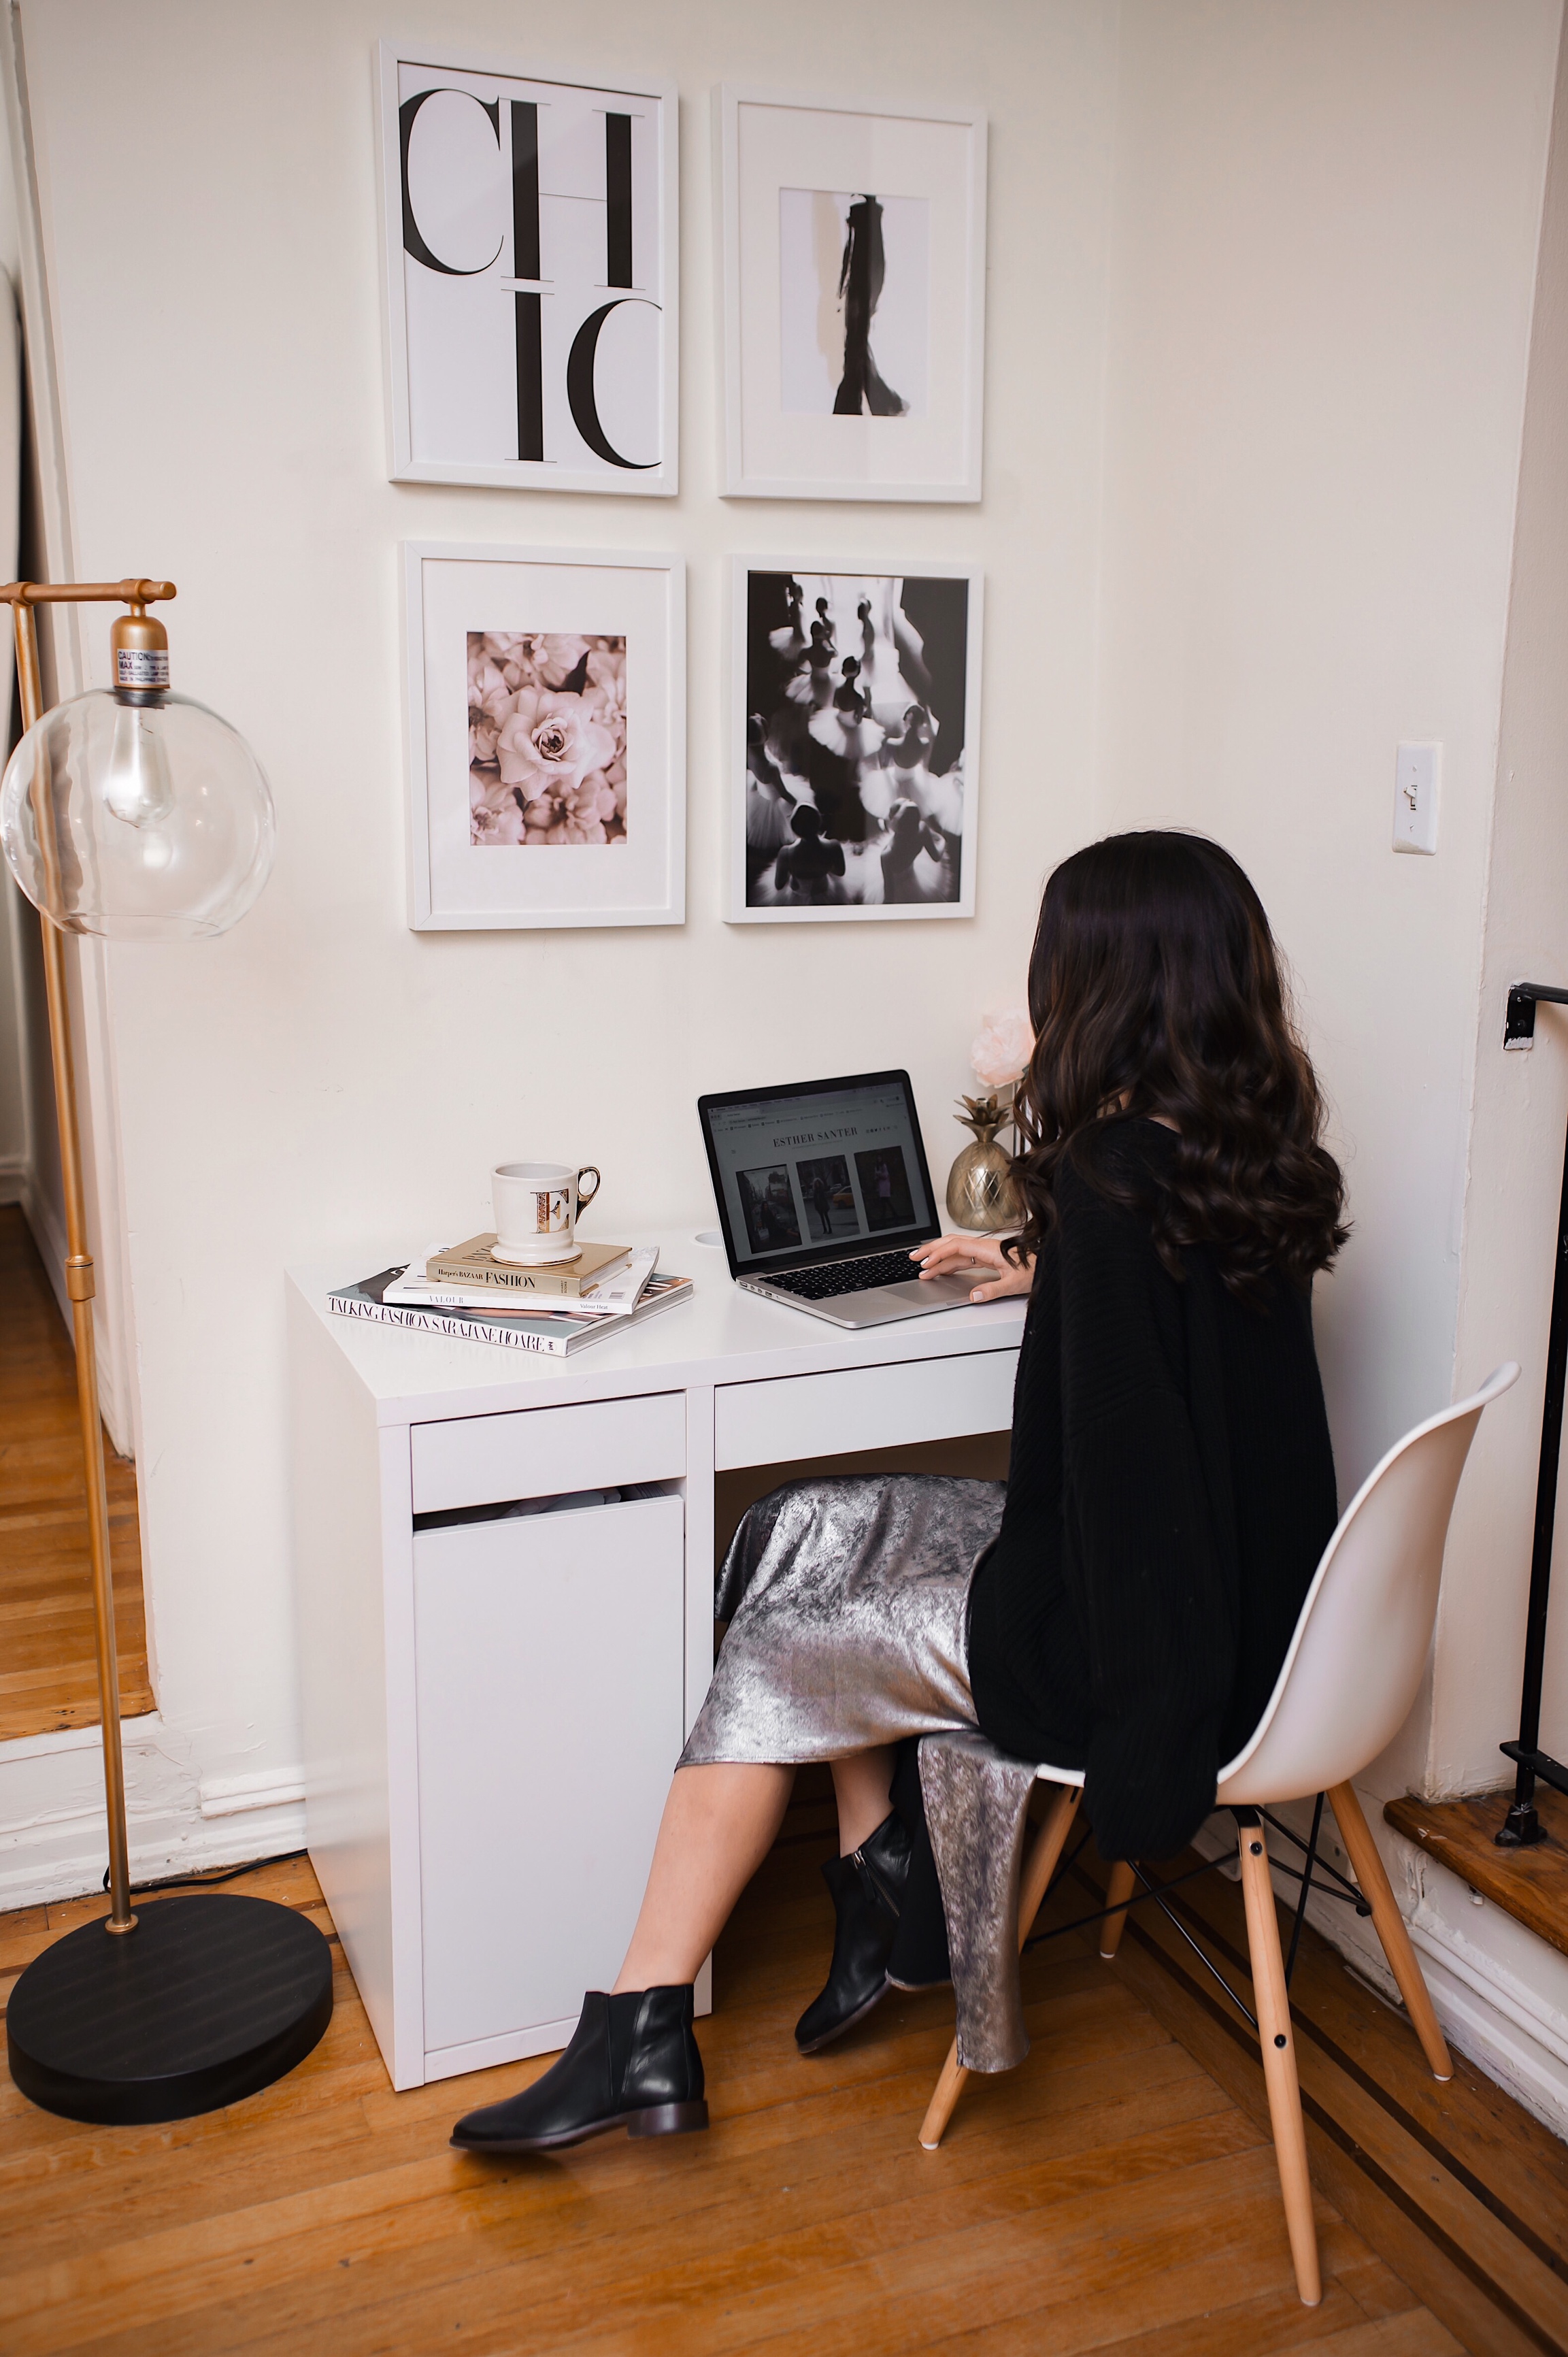 Selling Out And That Time I Got Stuck In A Contract Esther Santer Fashion Blog NYC Street Style Blogger Outfit OOTD Trendy Shopping Computer Macbook Home Office Space Ikea Joss & Main Artwork Prints White Picture Frames Lamp Comfy What To Wear Work.jpg